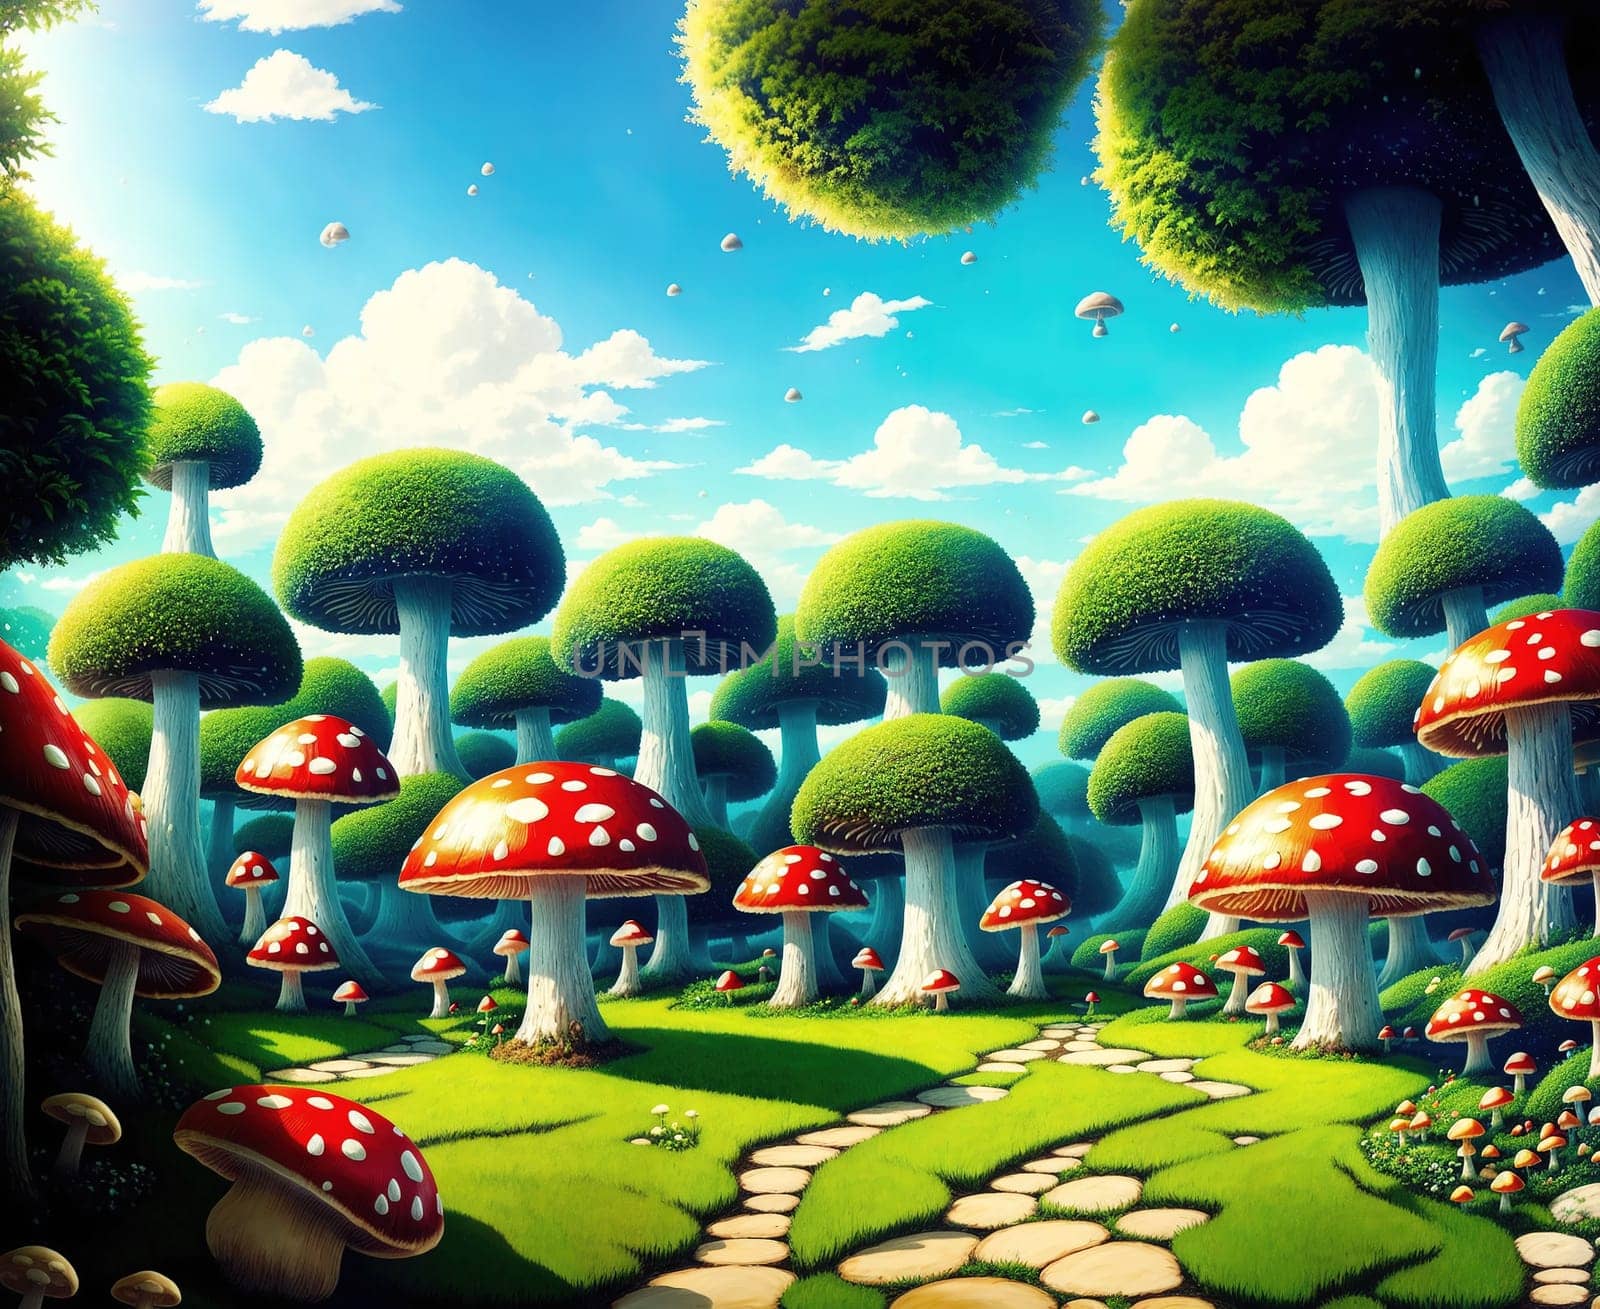 The image depicts a magical forest filled with mushrooms, trees, and a path leading through the woods.